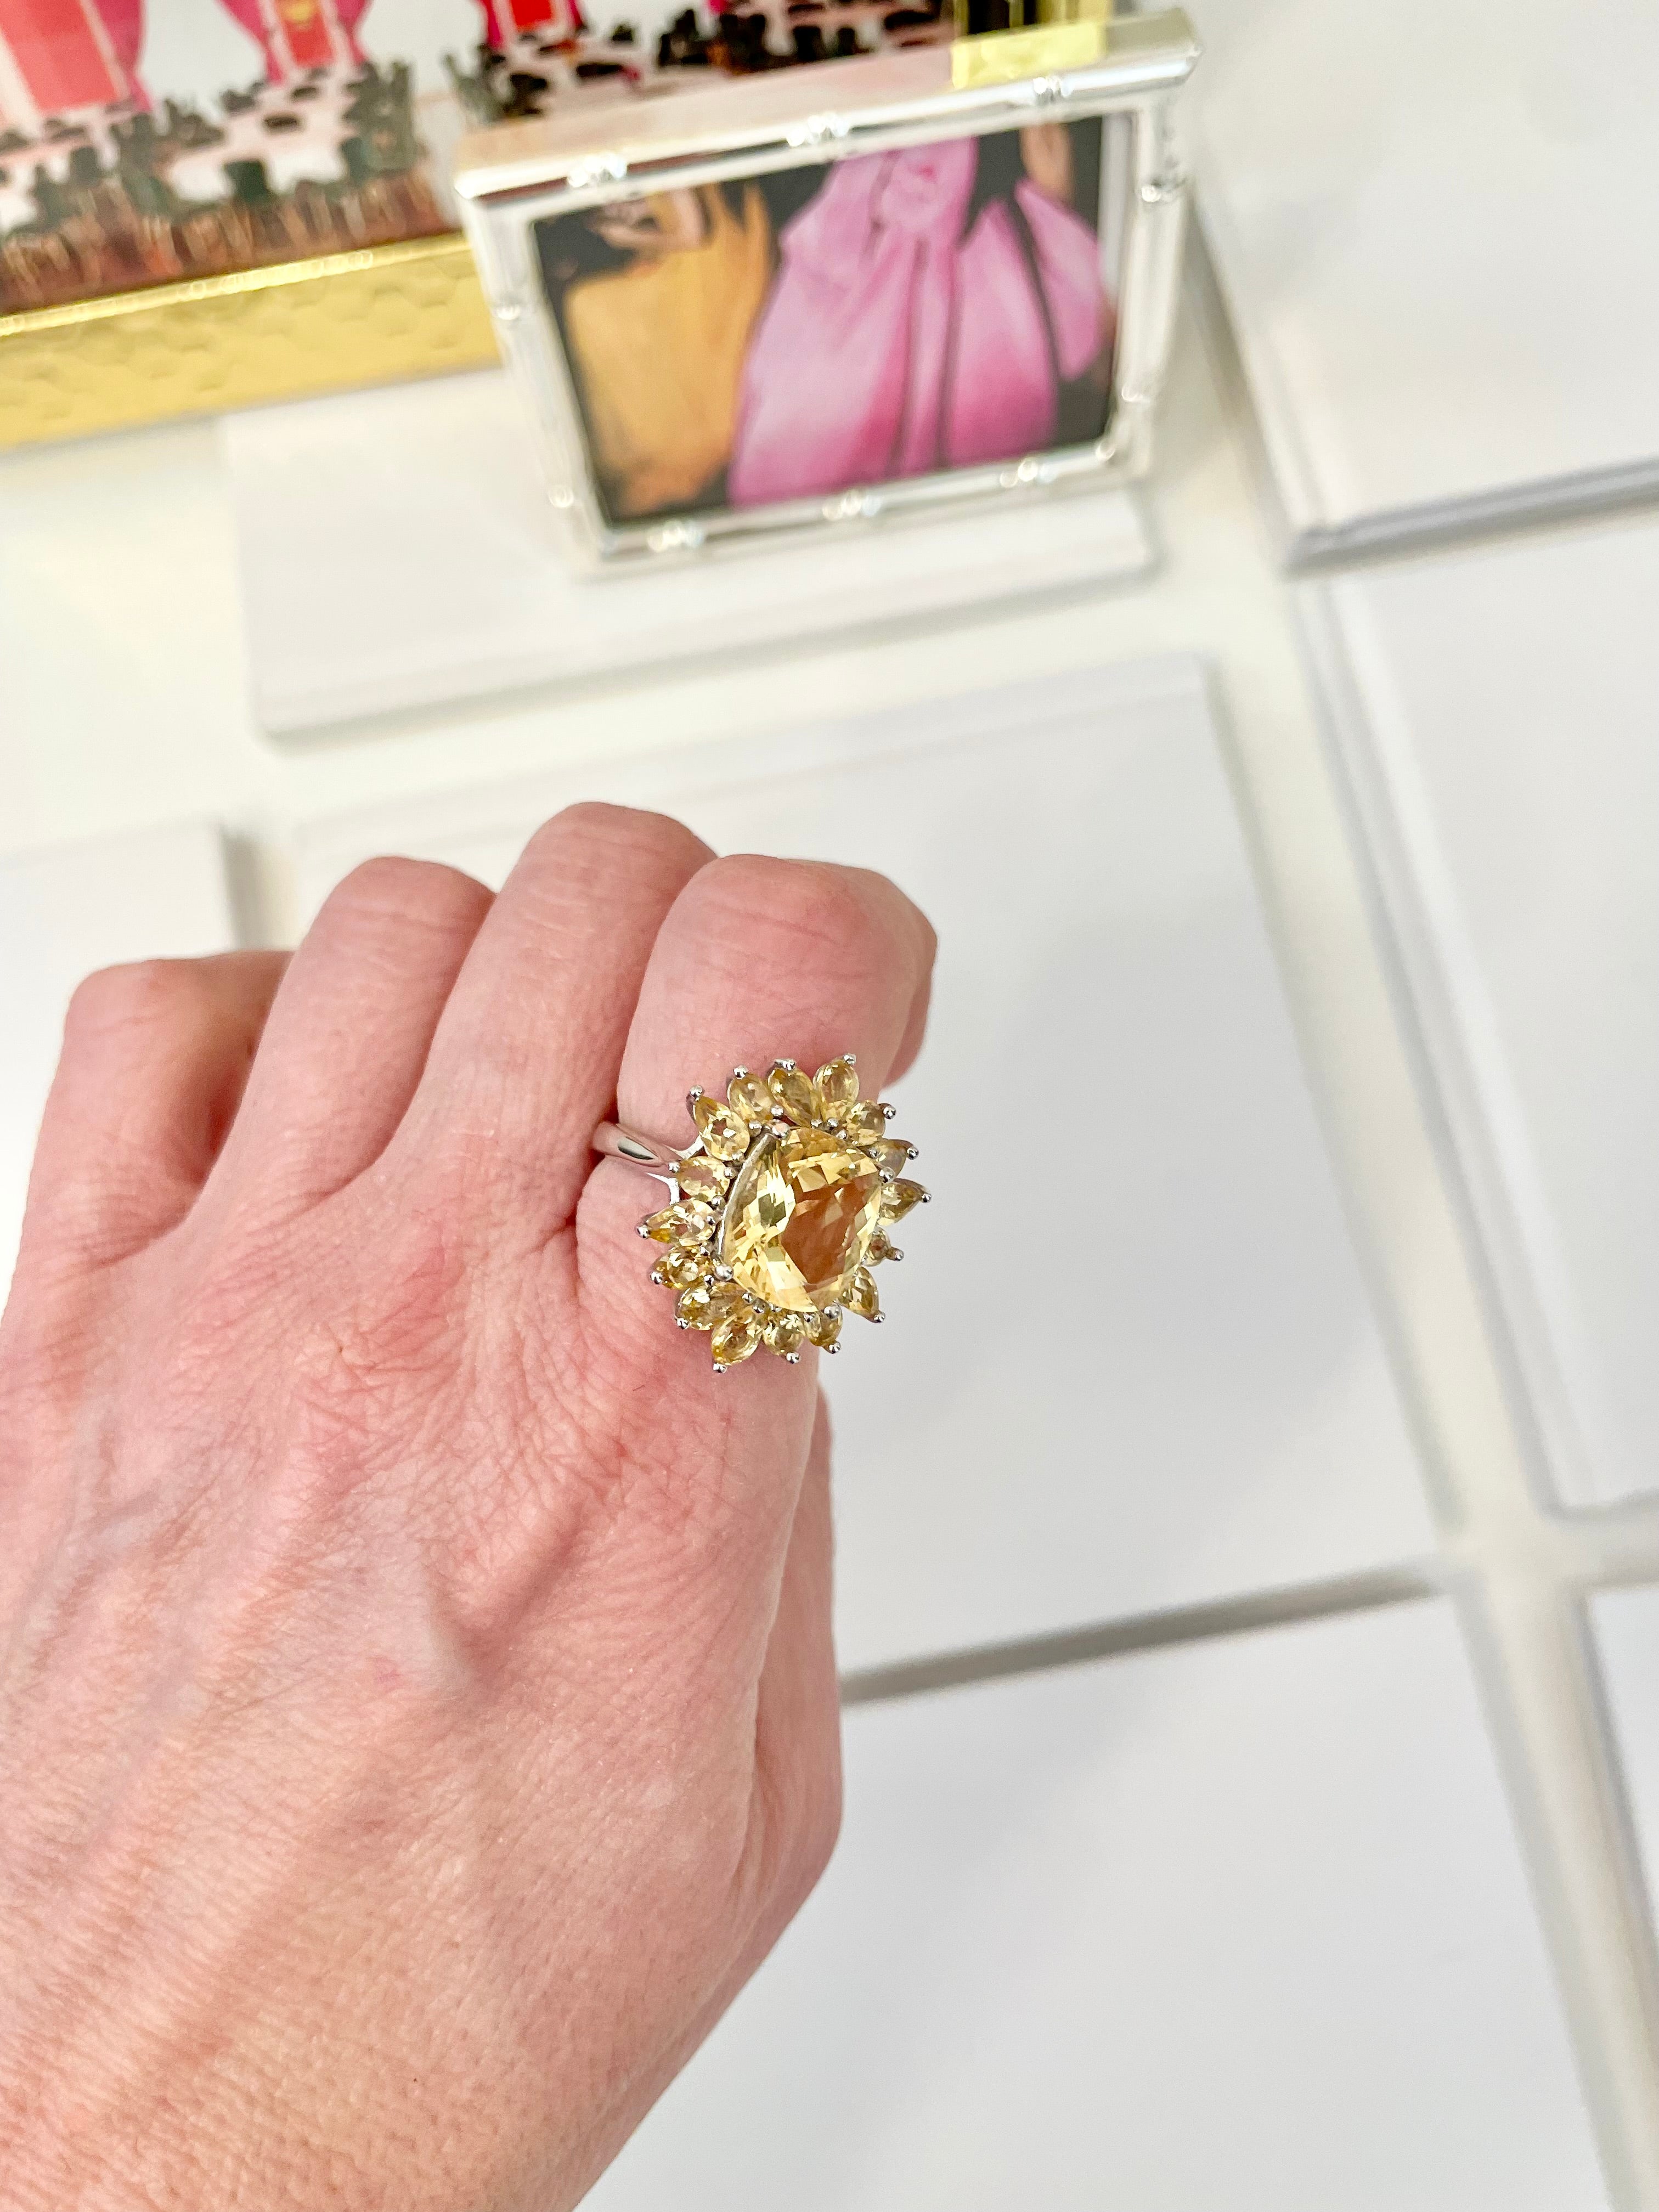 The most lovely citrine glass cocktail ring... so classic.